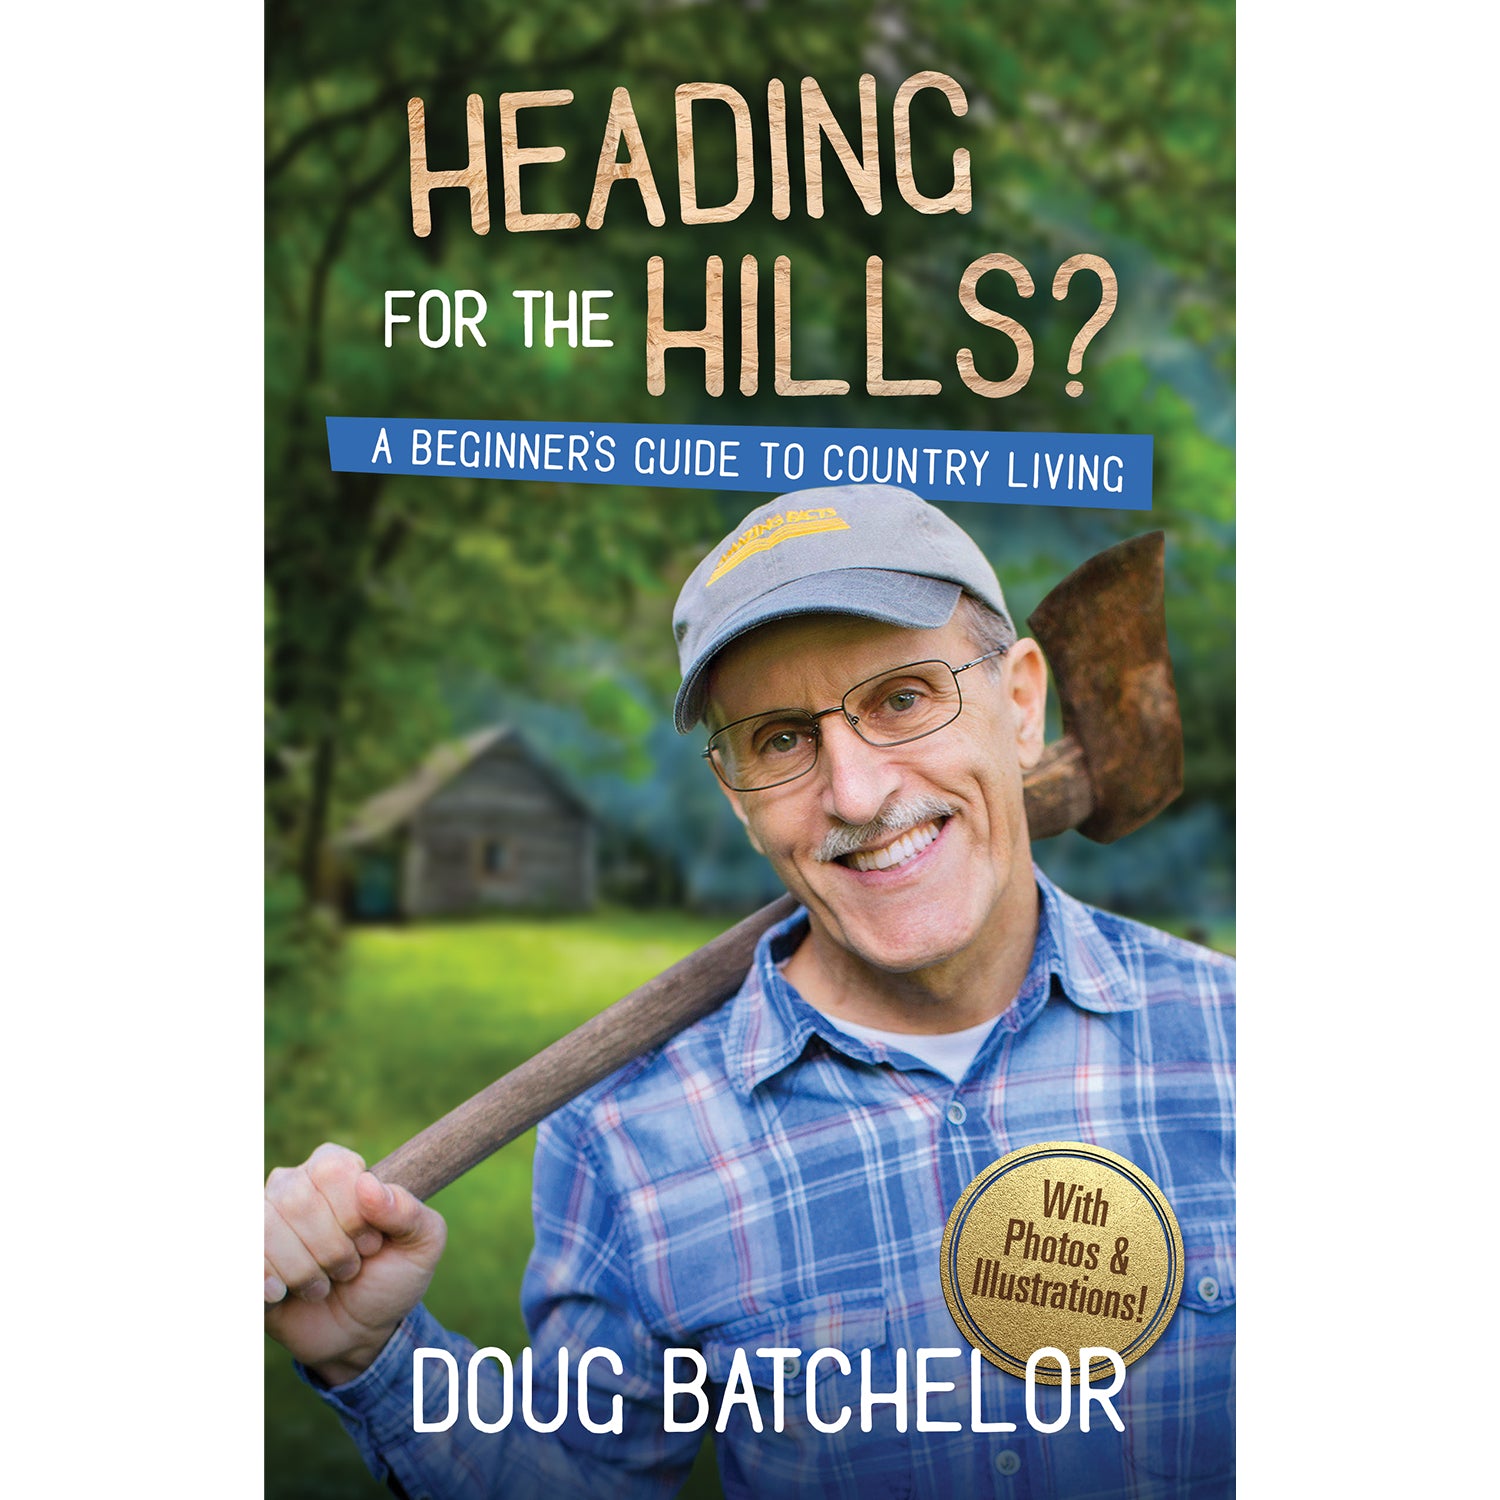 Country　Heading　Guide　Doug　Living　for　by　the　to　Hills:　A　Beginner's　Ba